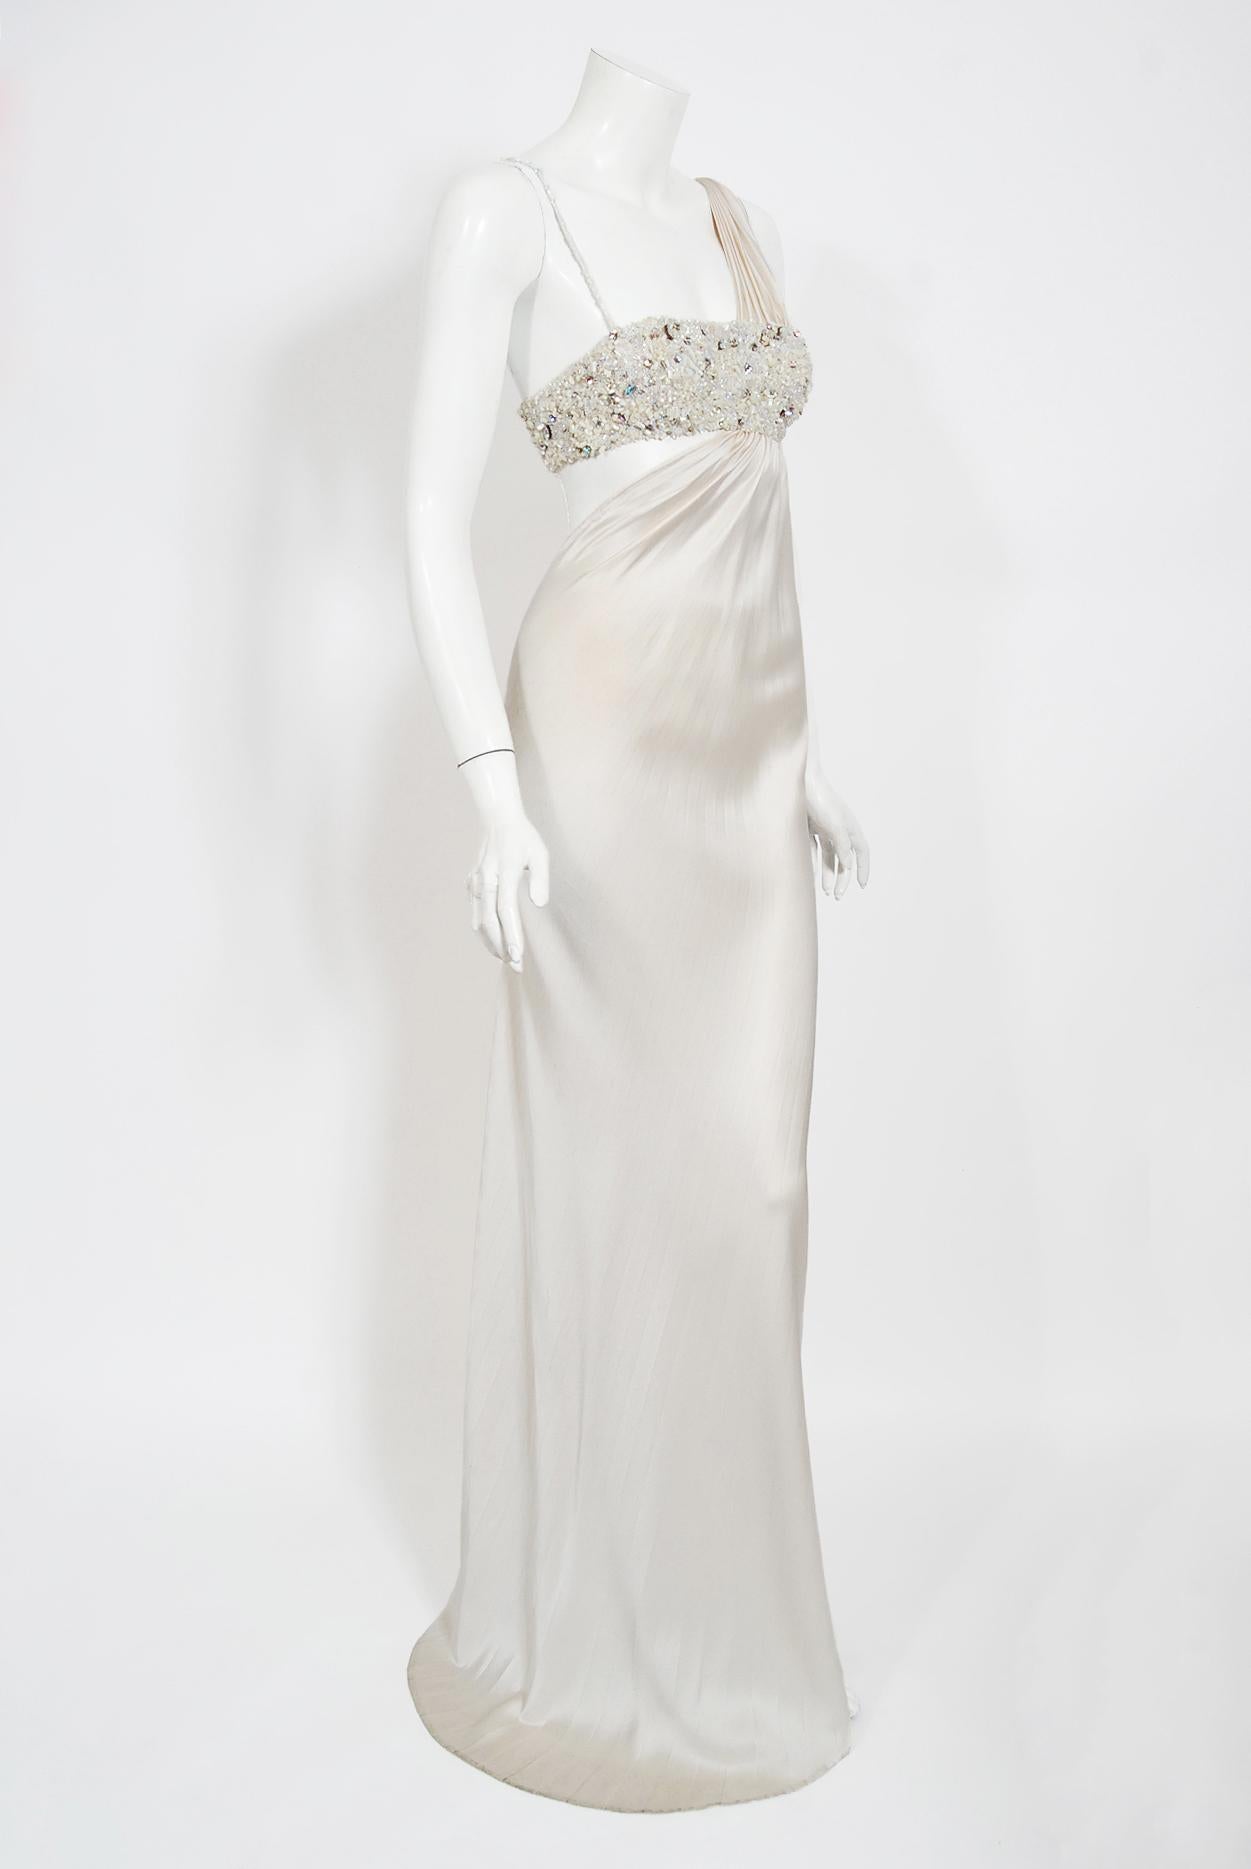 2000 Ungaro Haute Couture Crystal Beaded Asymmetric Cut-Out Ivory Silk Gown 3